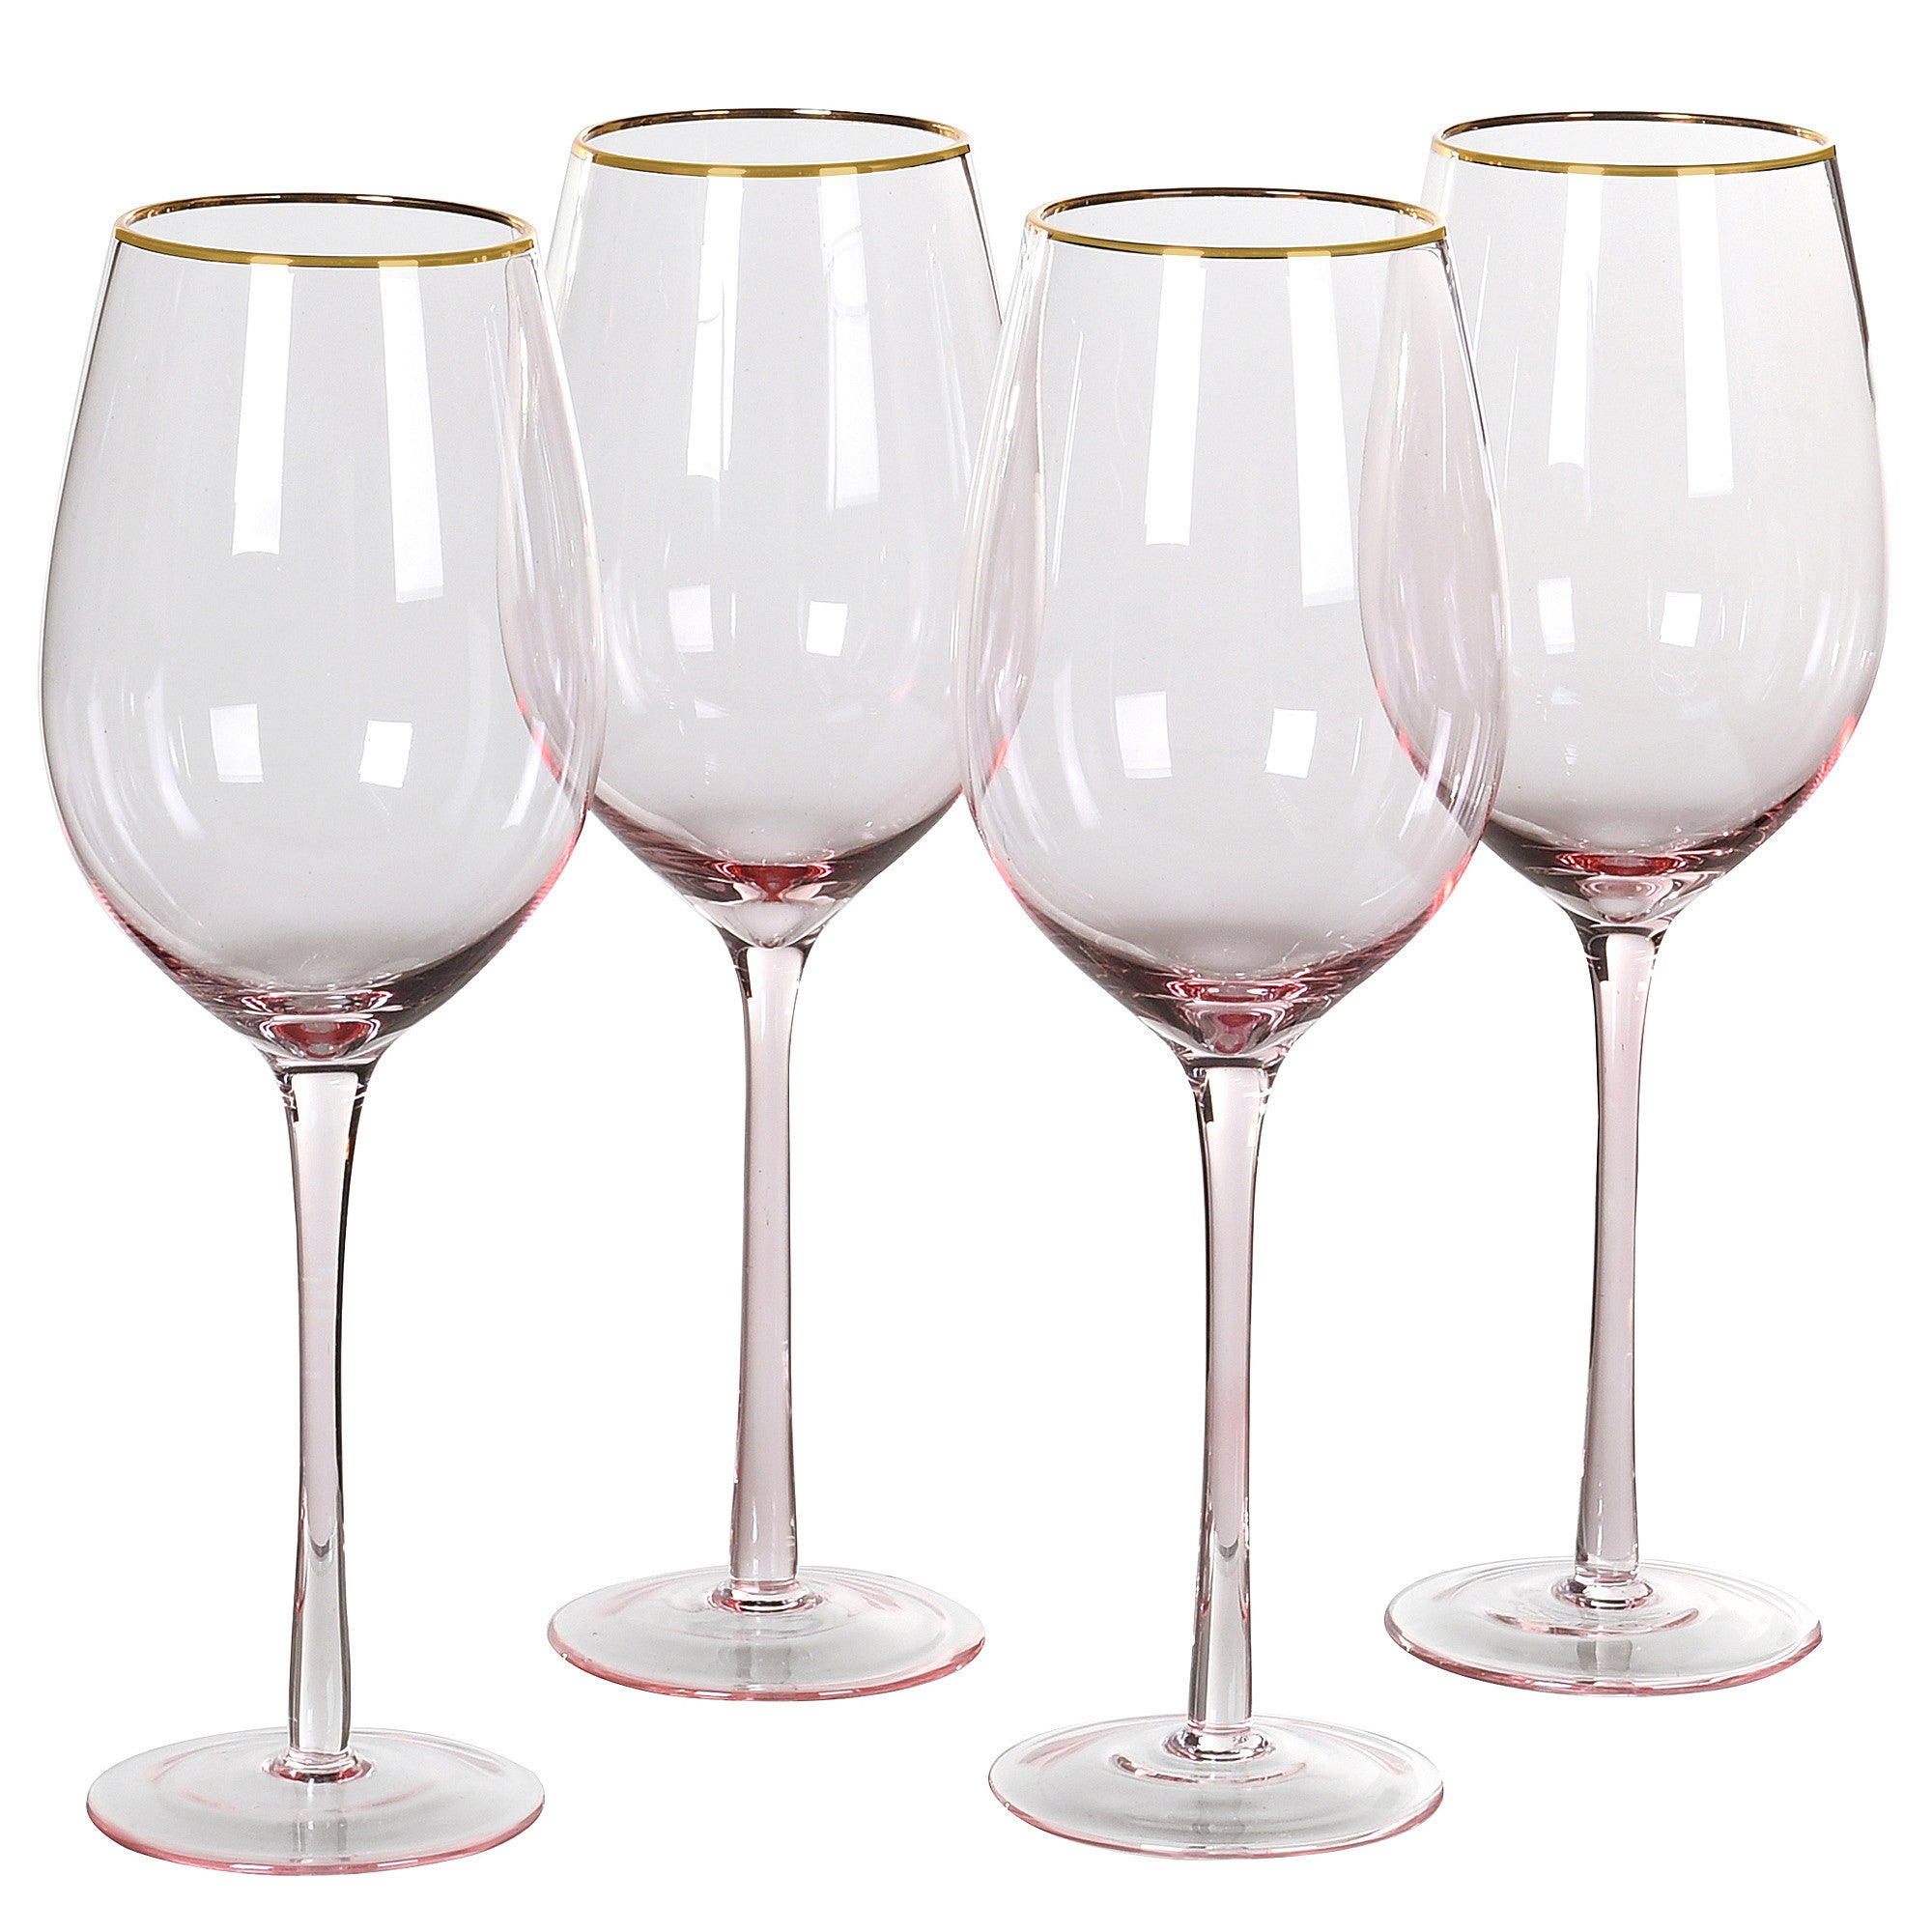 Pink Wine Glasses with Gold Rim | Set of 4